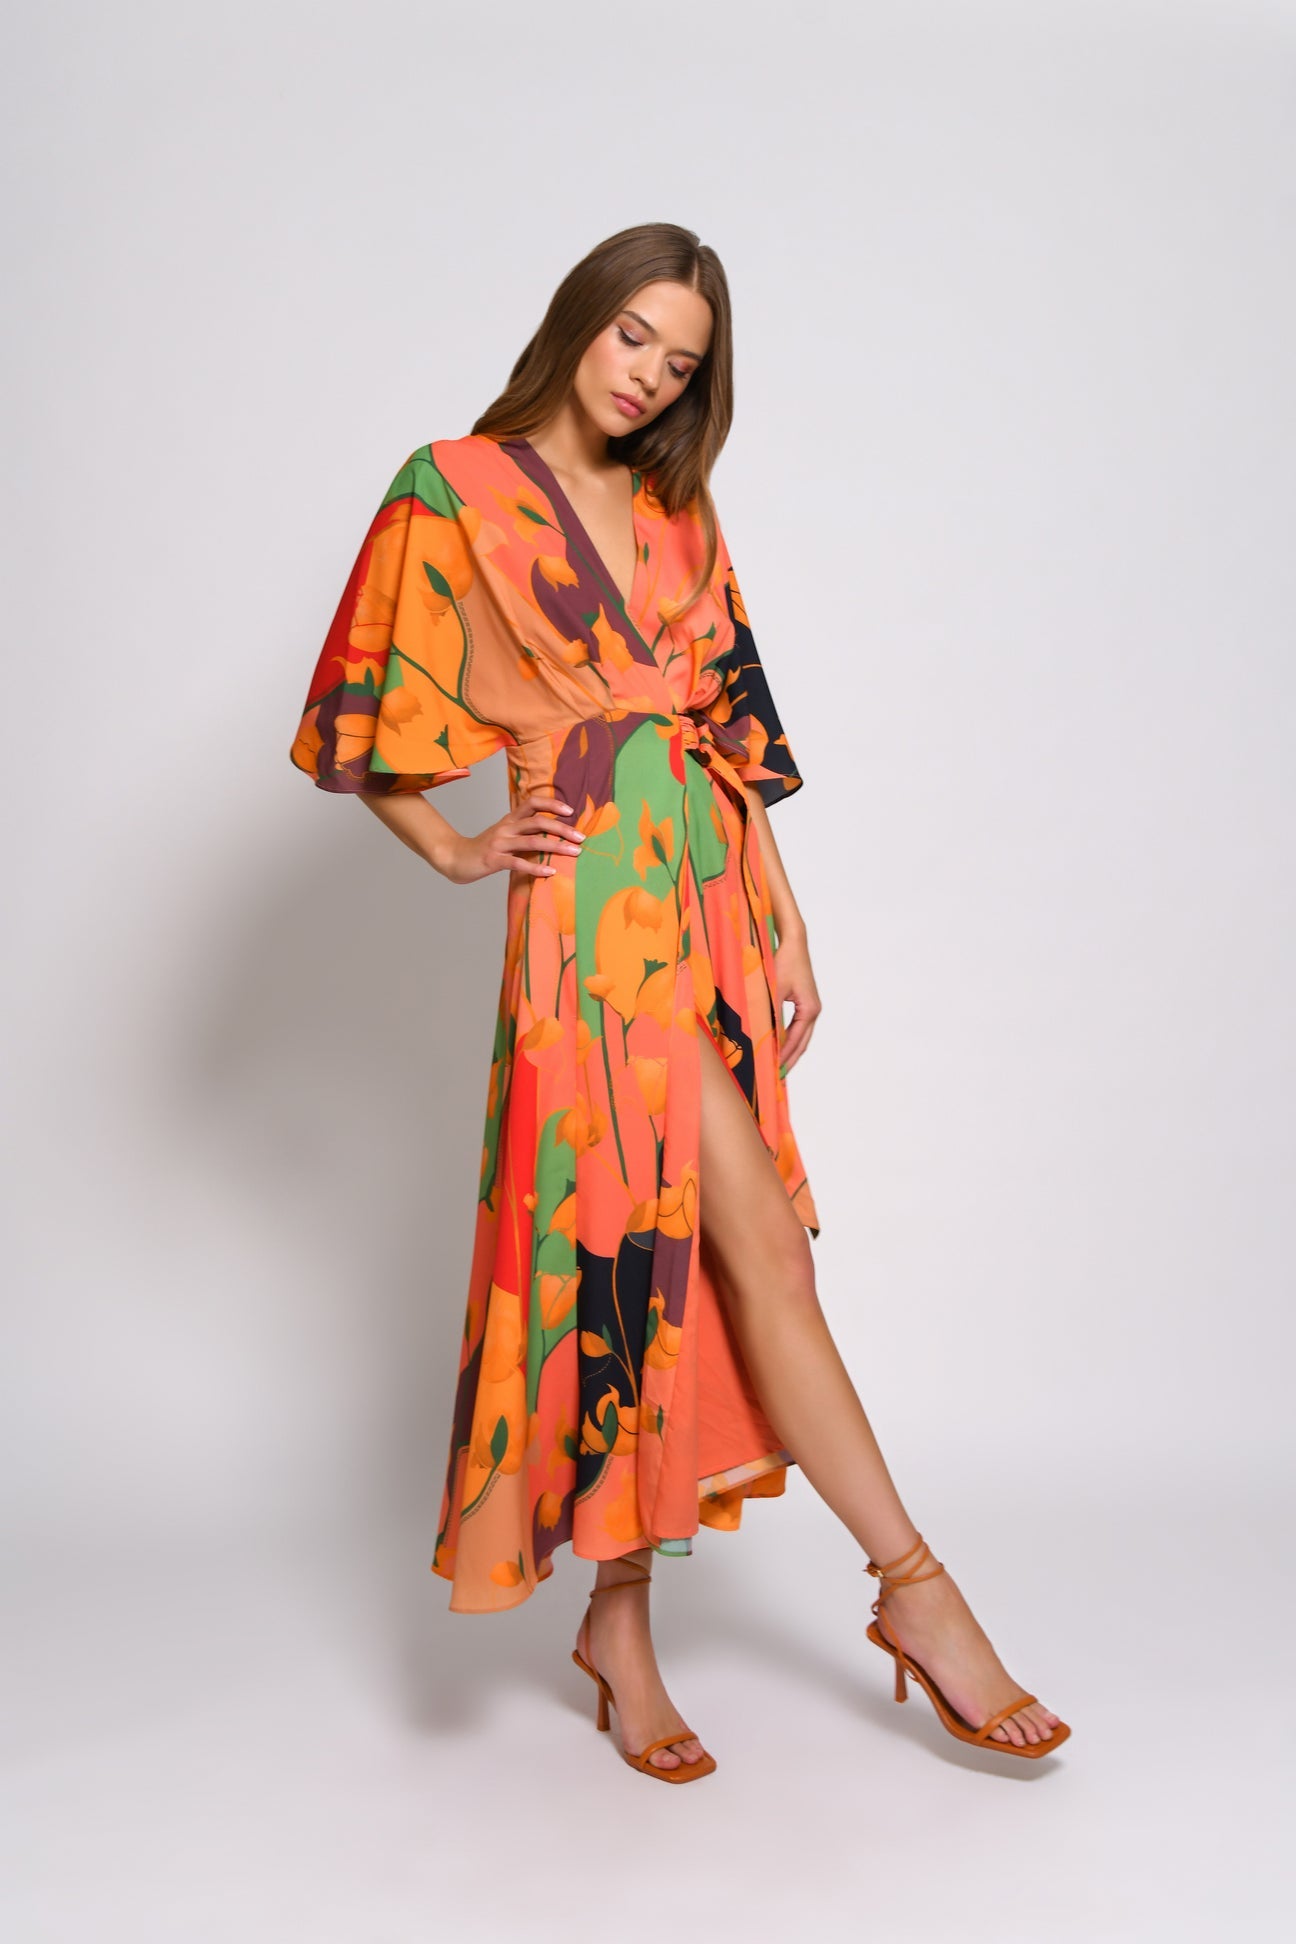 Lyna Dress in Multi Patch Floral